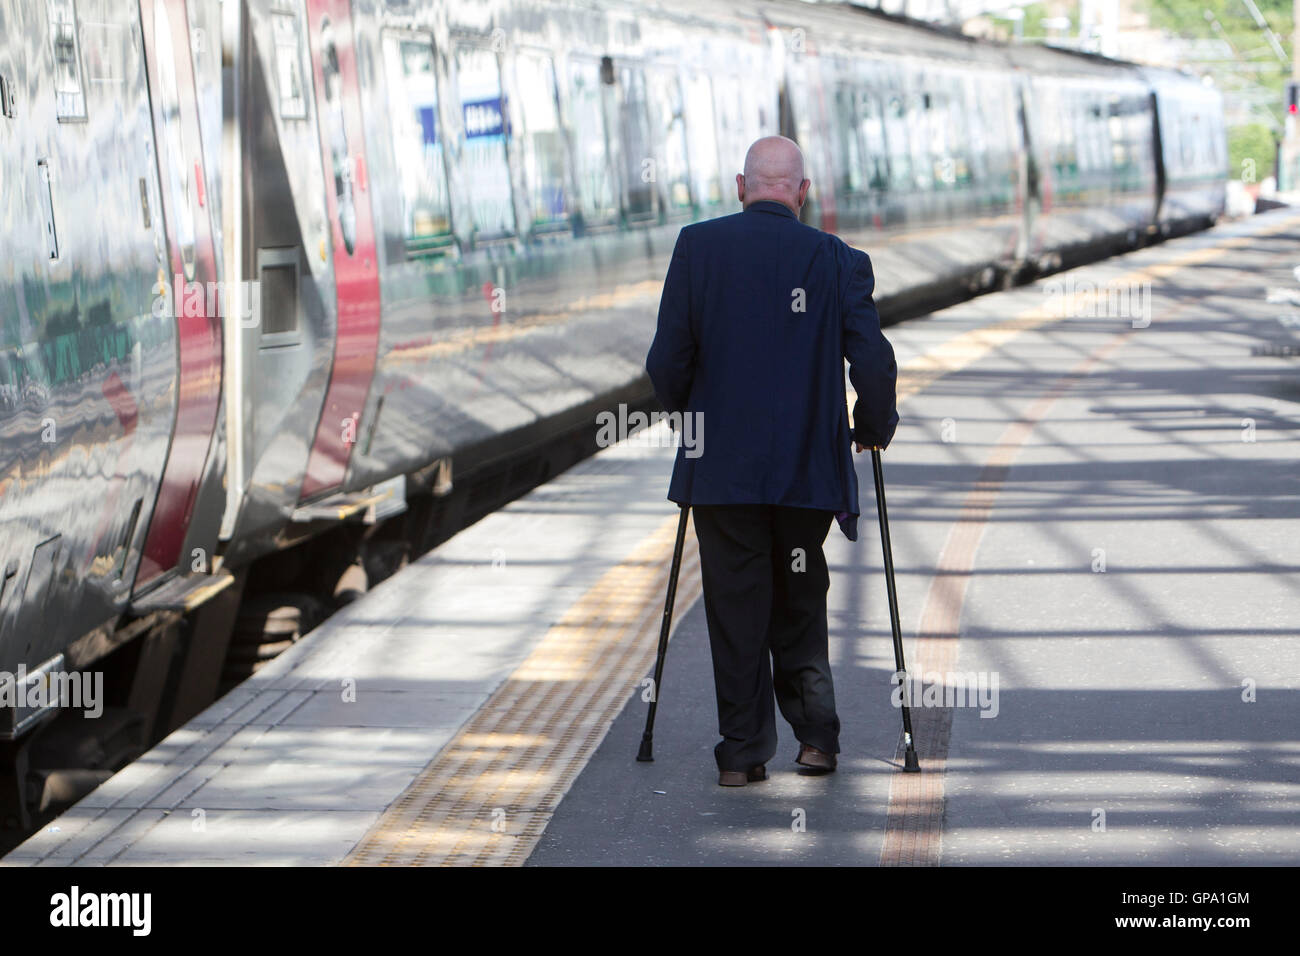 Disabled person using public transport Stock Photo